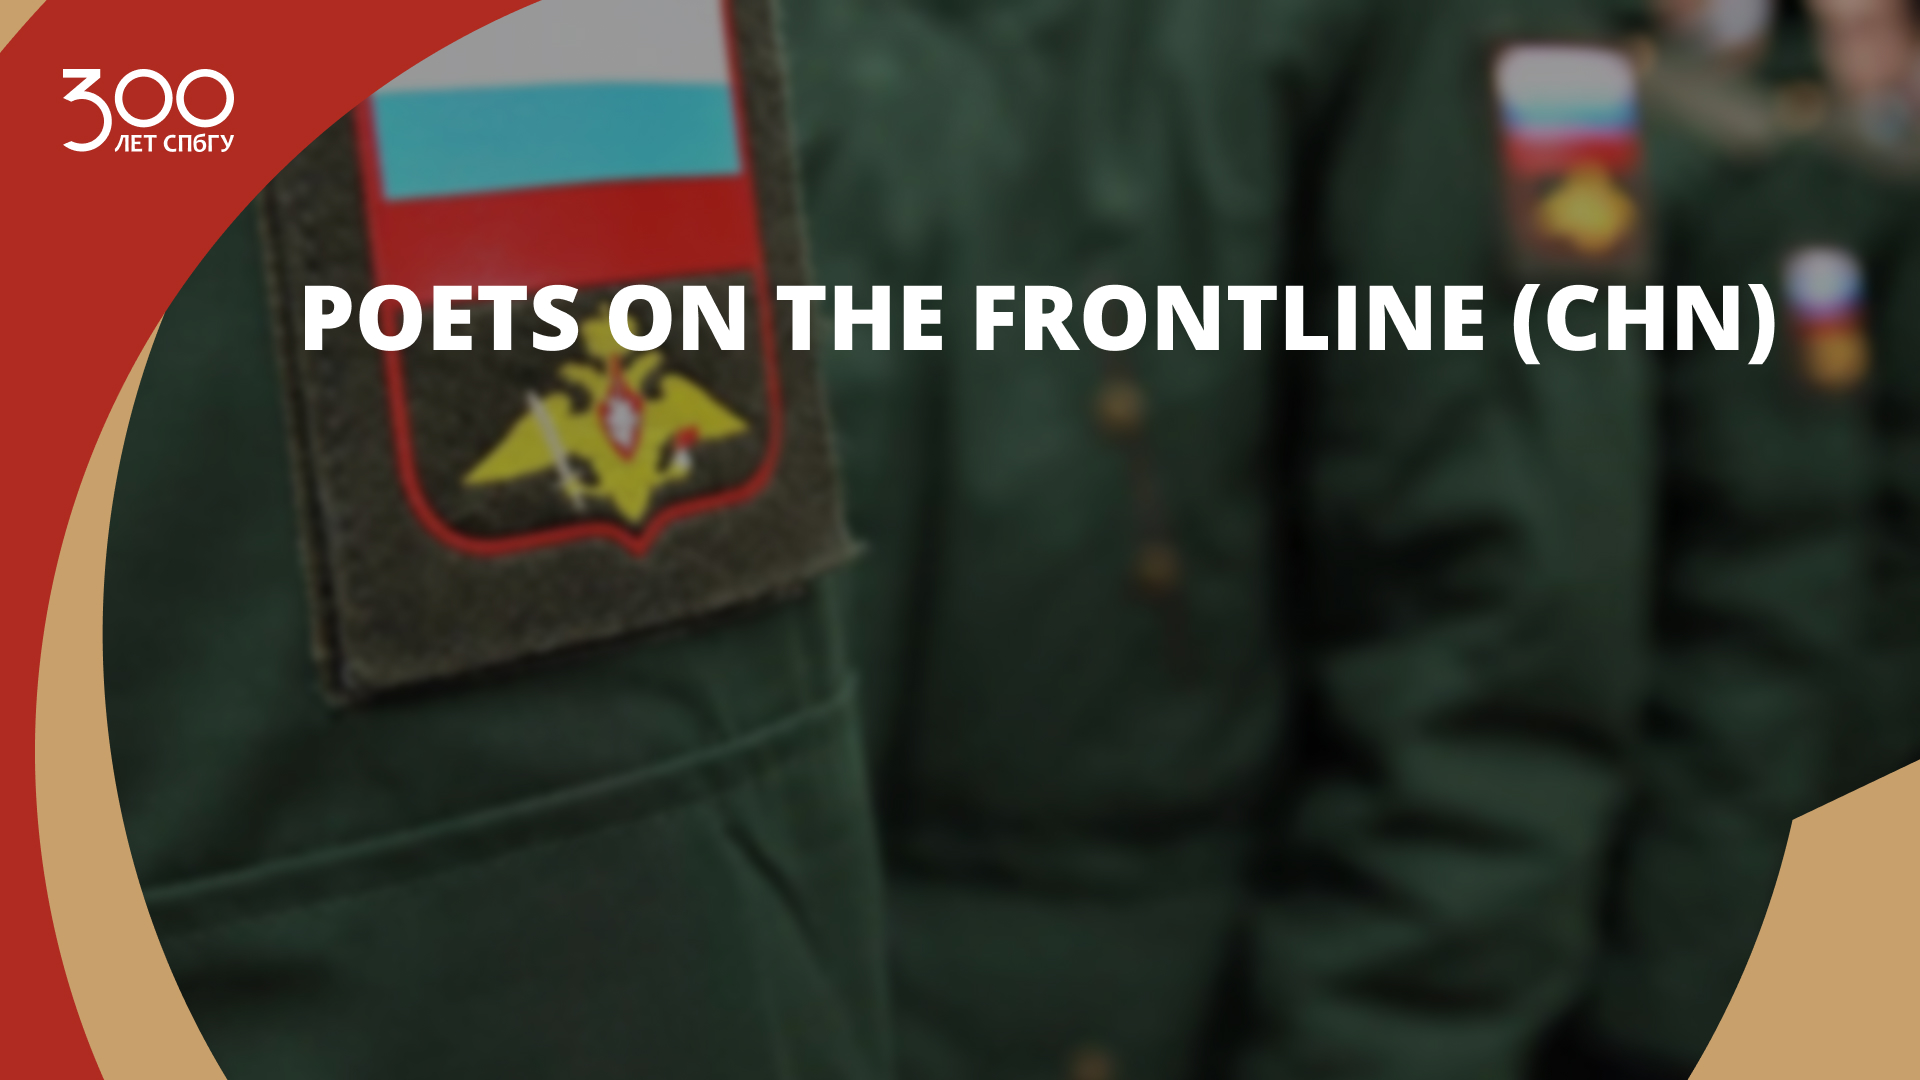 Poets on the Frontline (CHN)